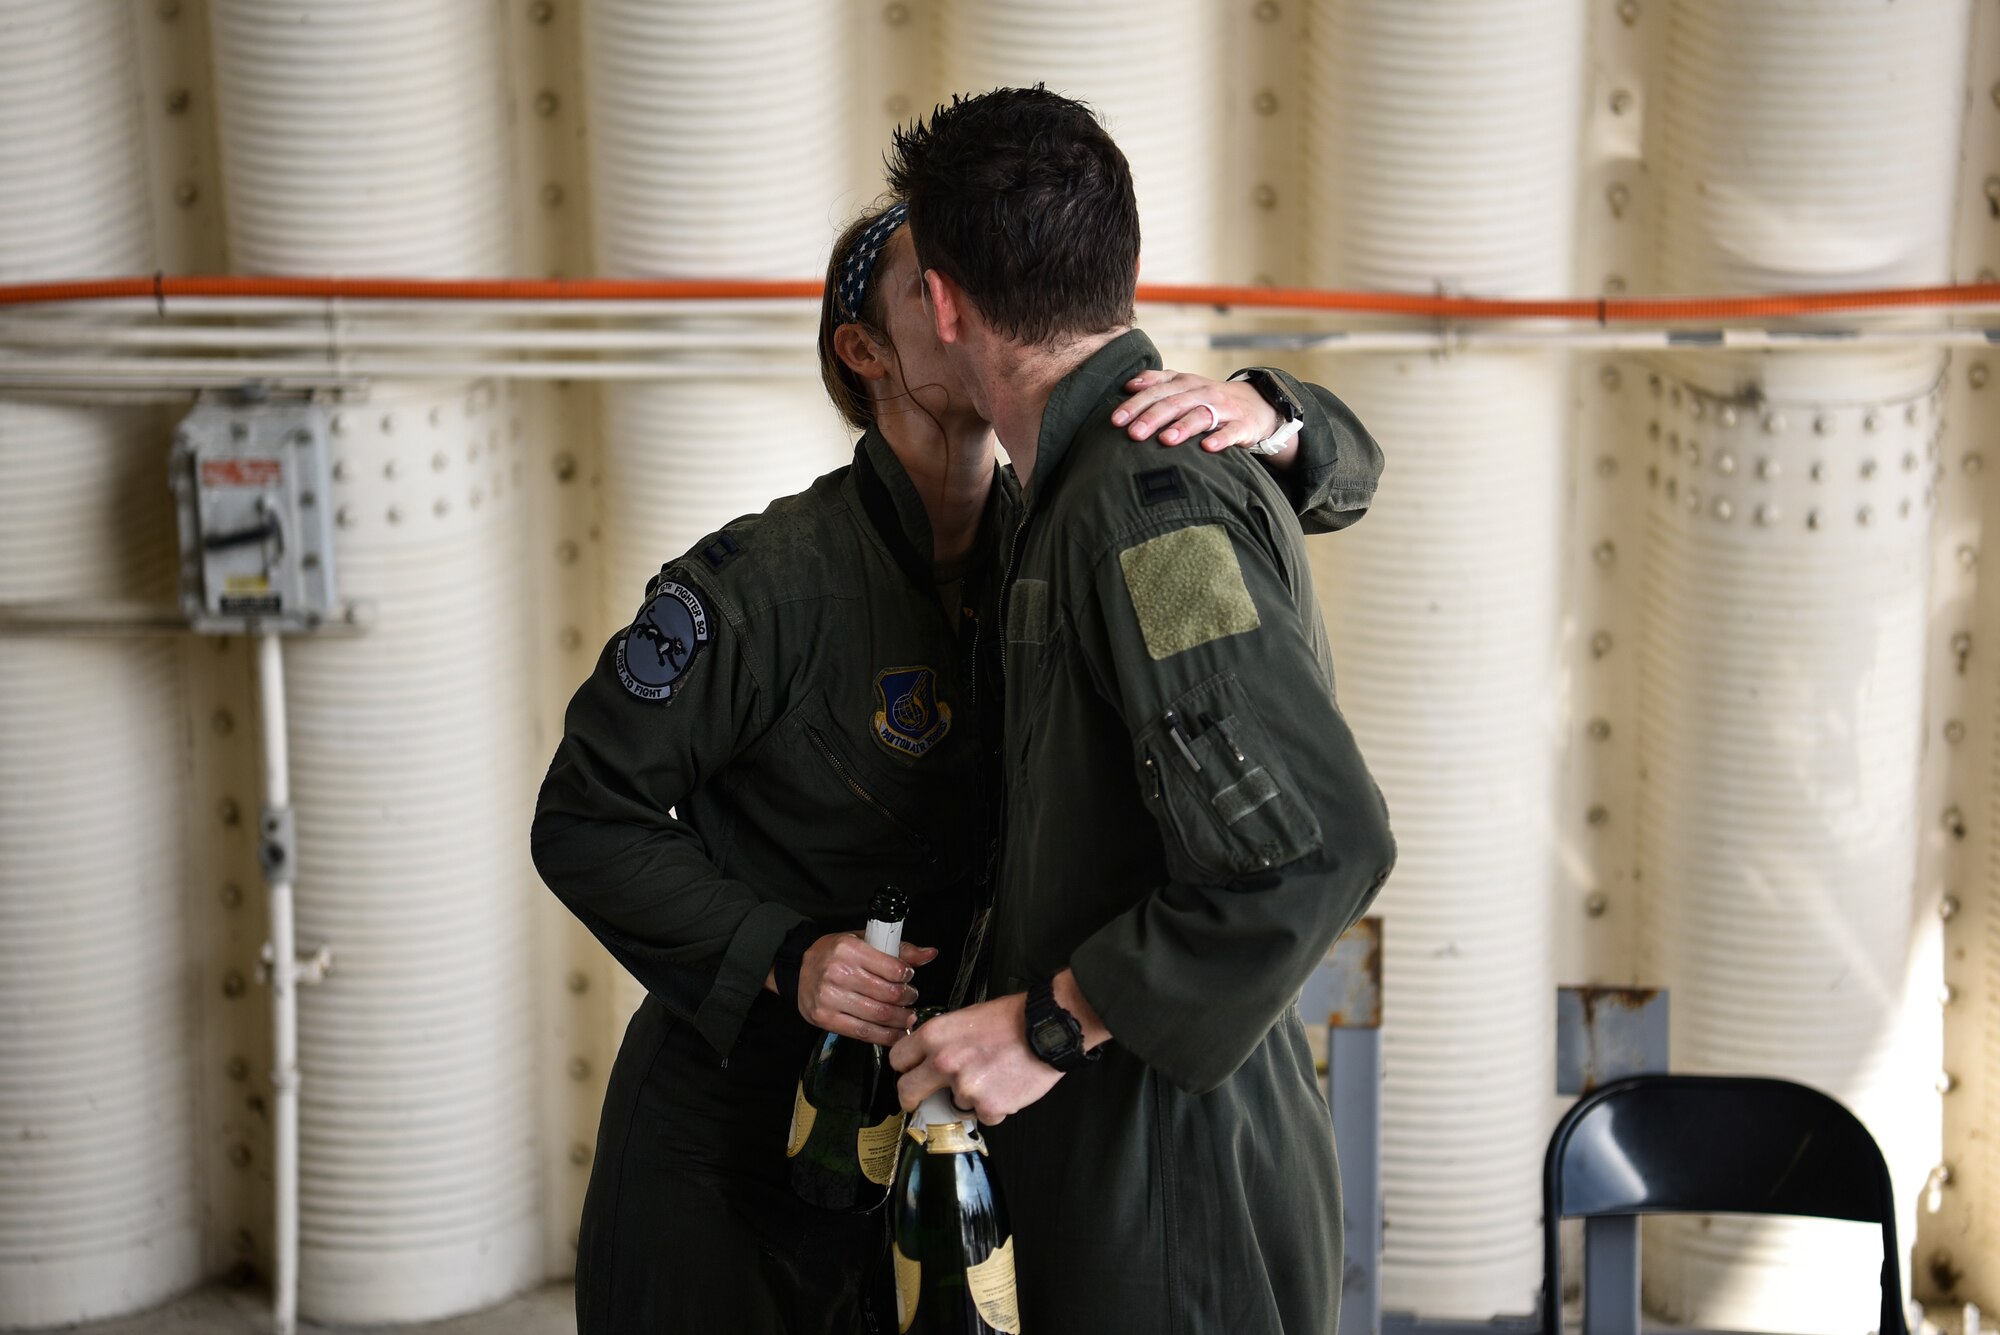 Married pilots embrace each other after a flight.